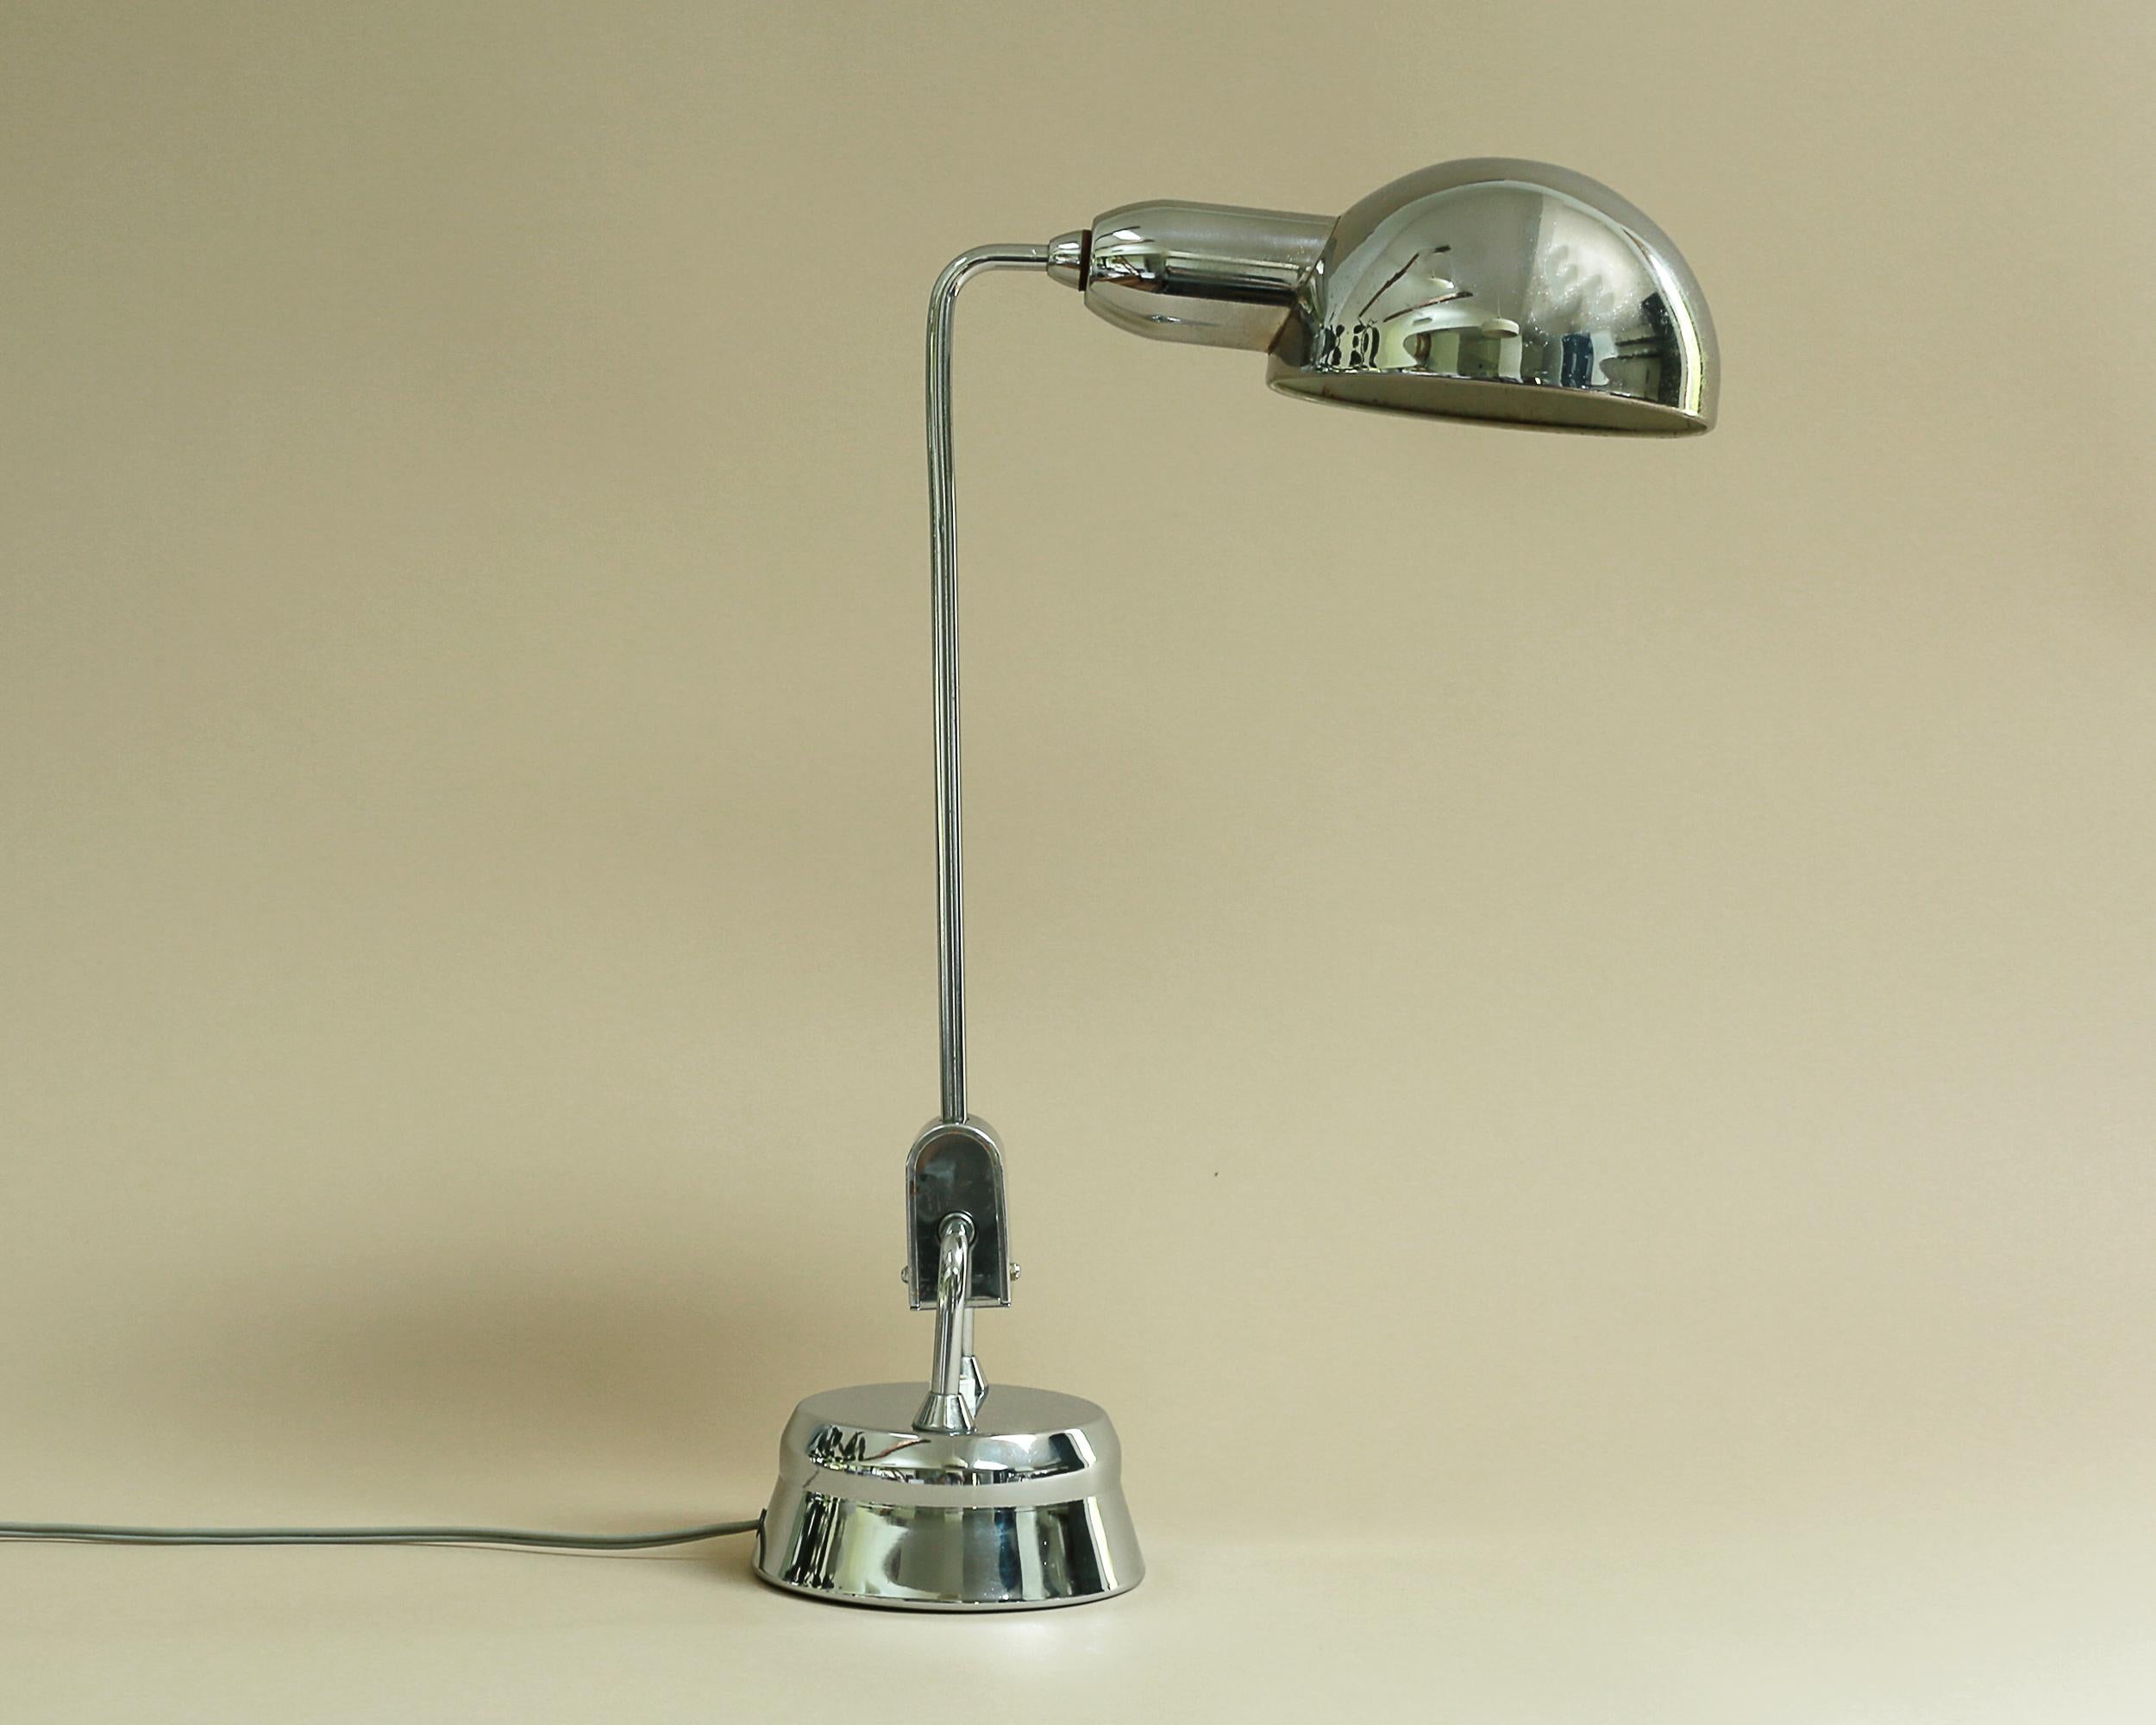 French Vintage Jumo 600 Chrome Table Lamp - 1940's - 1950's Mid Century Modern For Sale